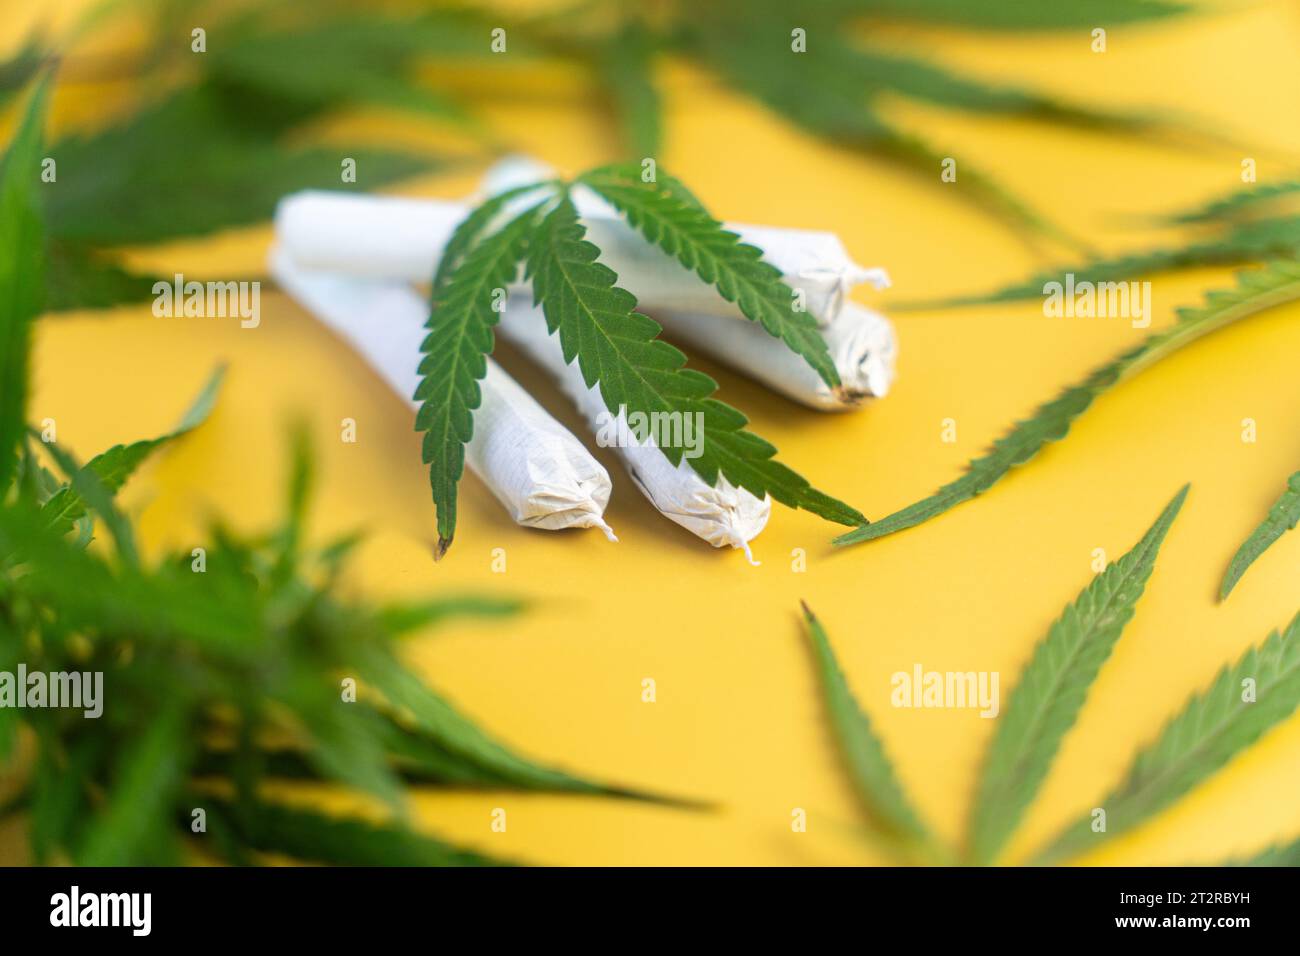 Equipment smoke weed on yellow background. Cannabis legalisation. CBD and THC on buds in cannabis. Cannabis buds weed on wood background. Marijuana sm Stock Photo